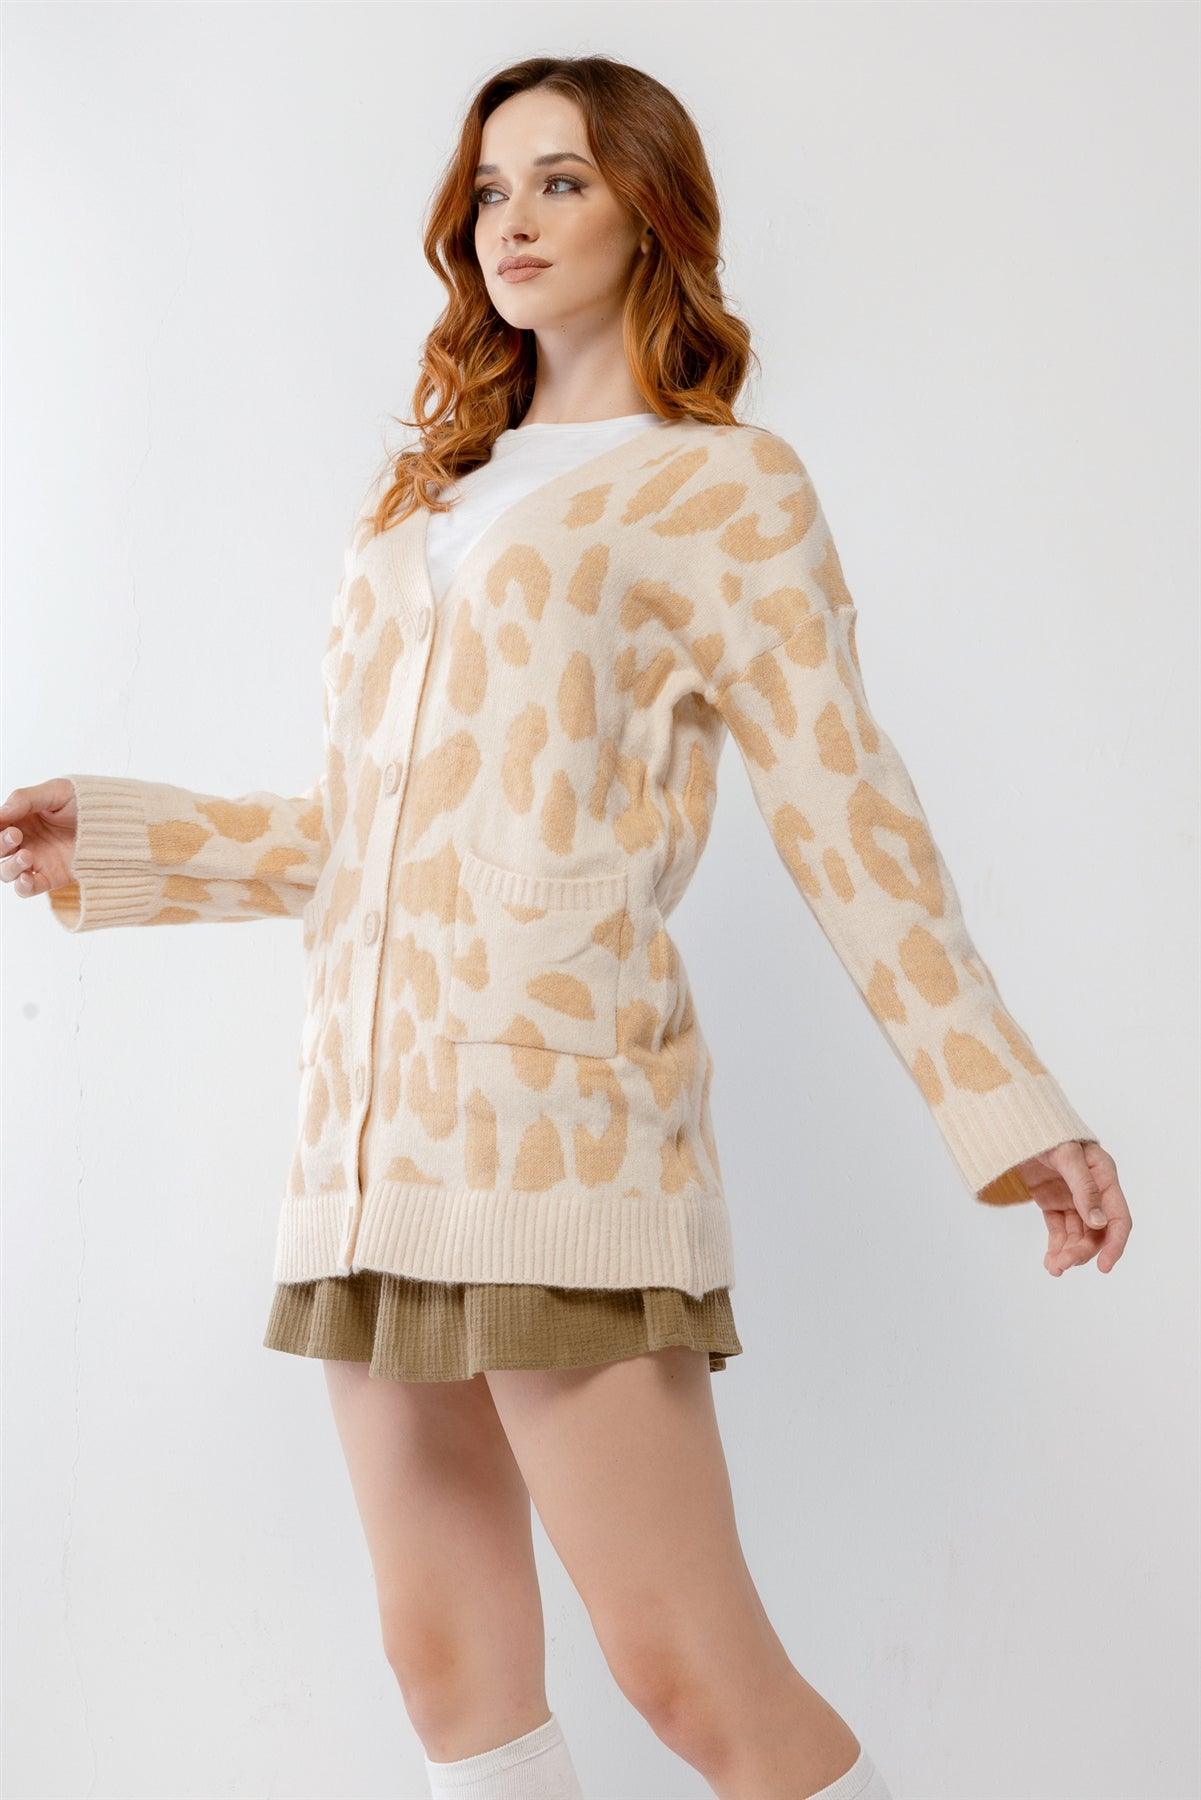 Cream Giraffe Print Front Button-Up Two Pocket Long Sleeve Sweater Cardigan /1-2-3